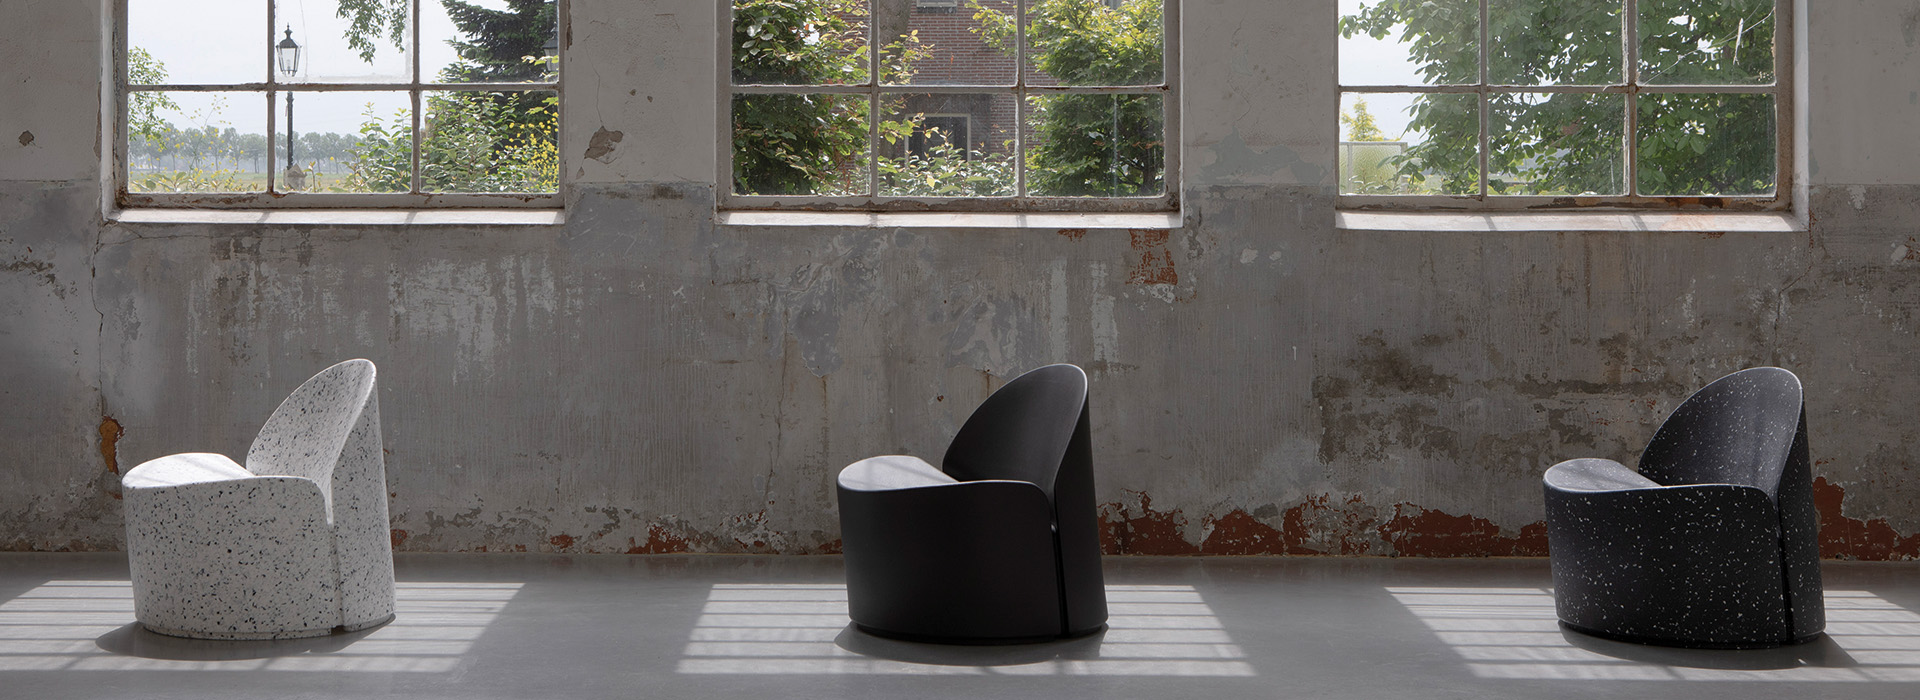 Banne Bloom lounge chair wint twee Archiproducts Design Awards 2022